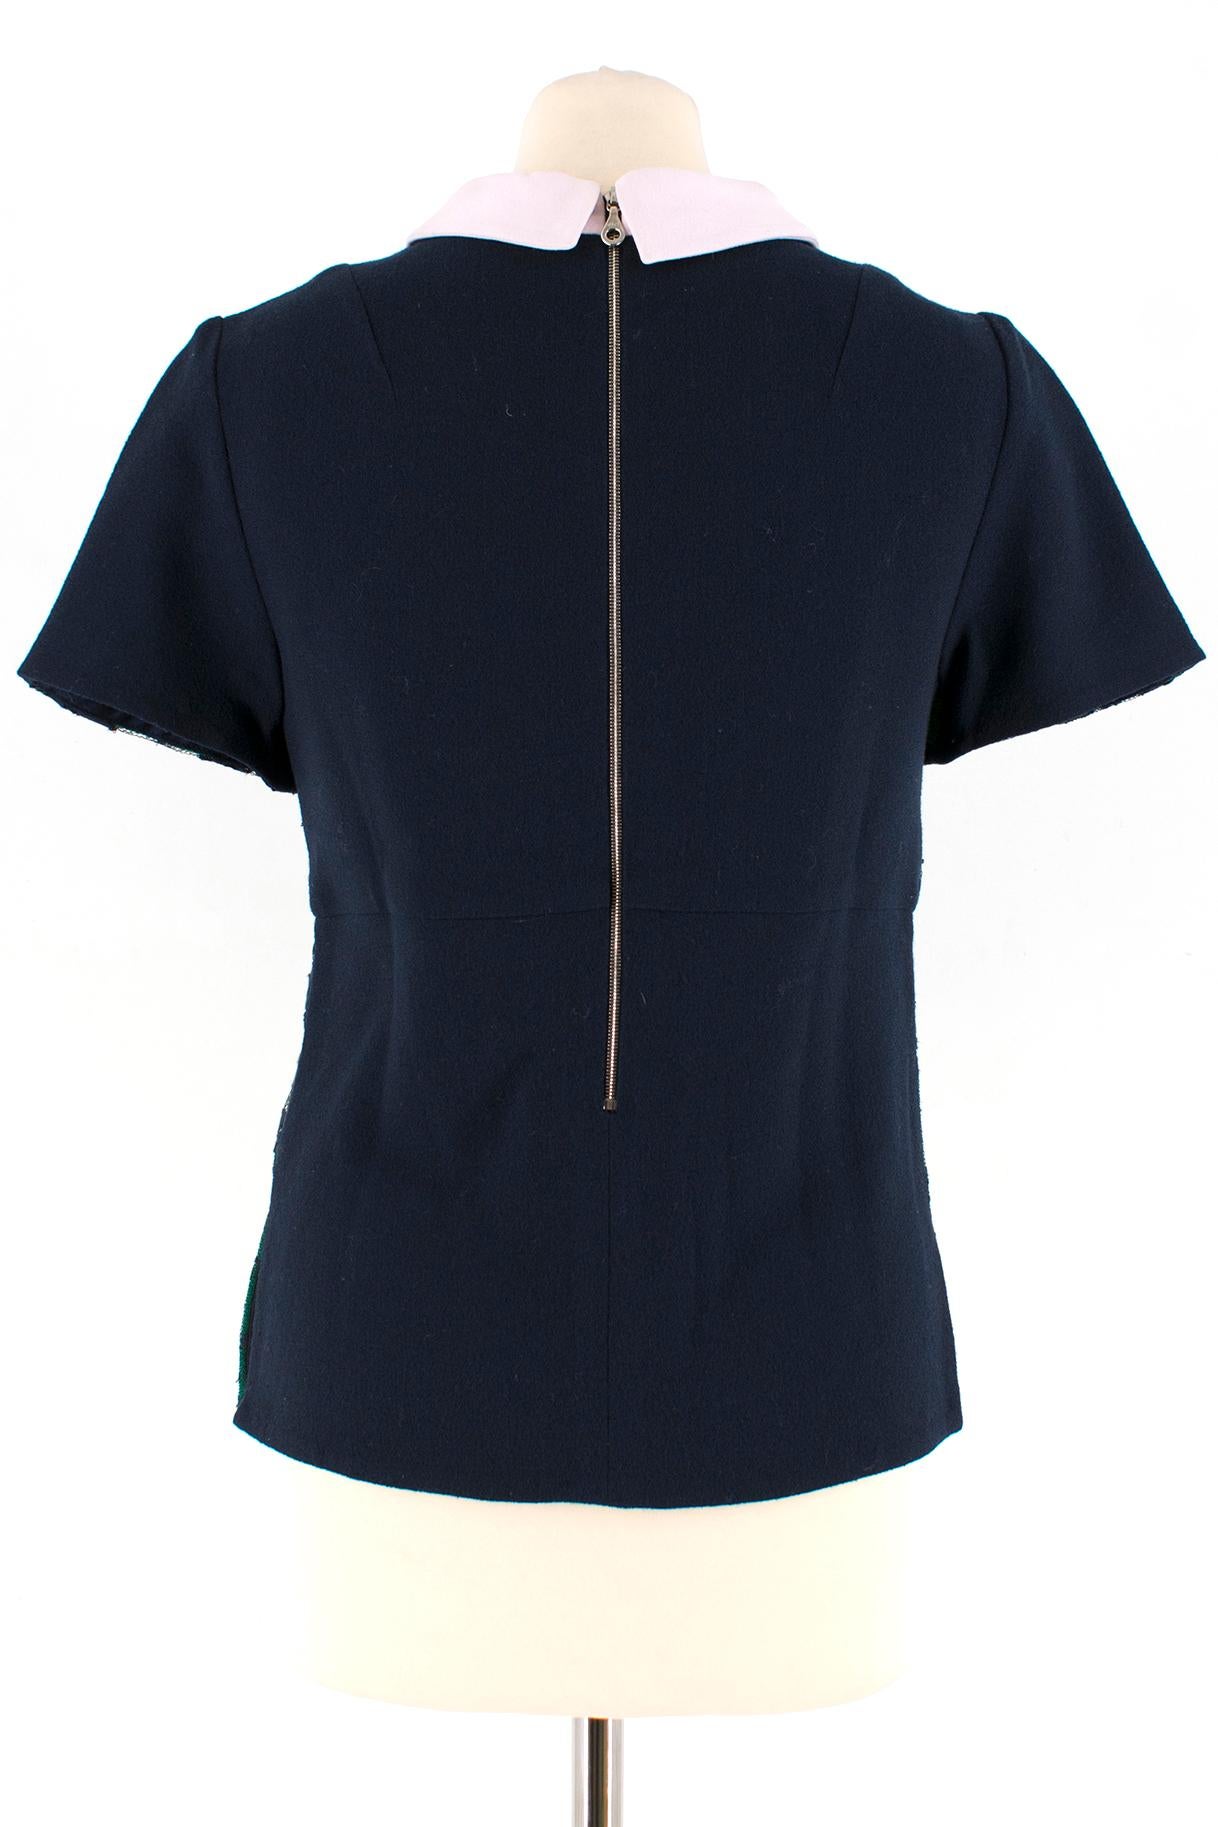 Black Erdem Navy & Green Wool Embroidered Top W/ Baby Pink Collar Size US 4 For Sale